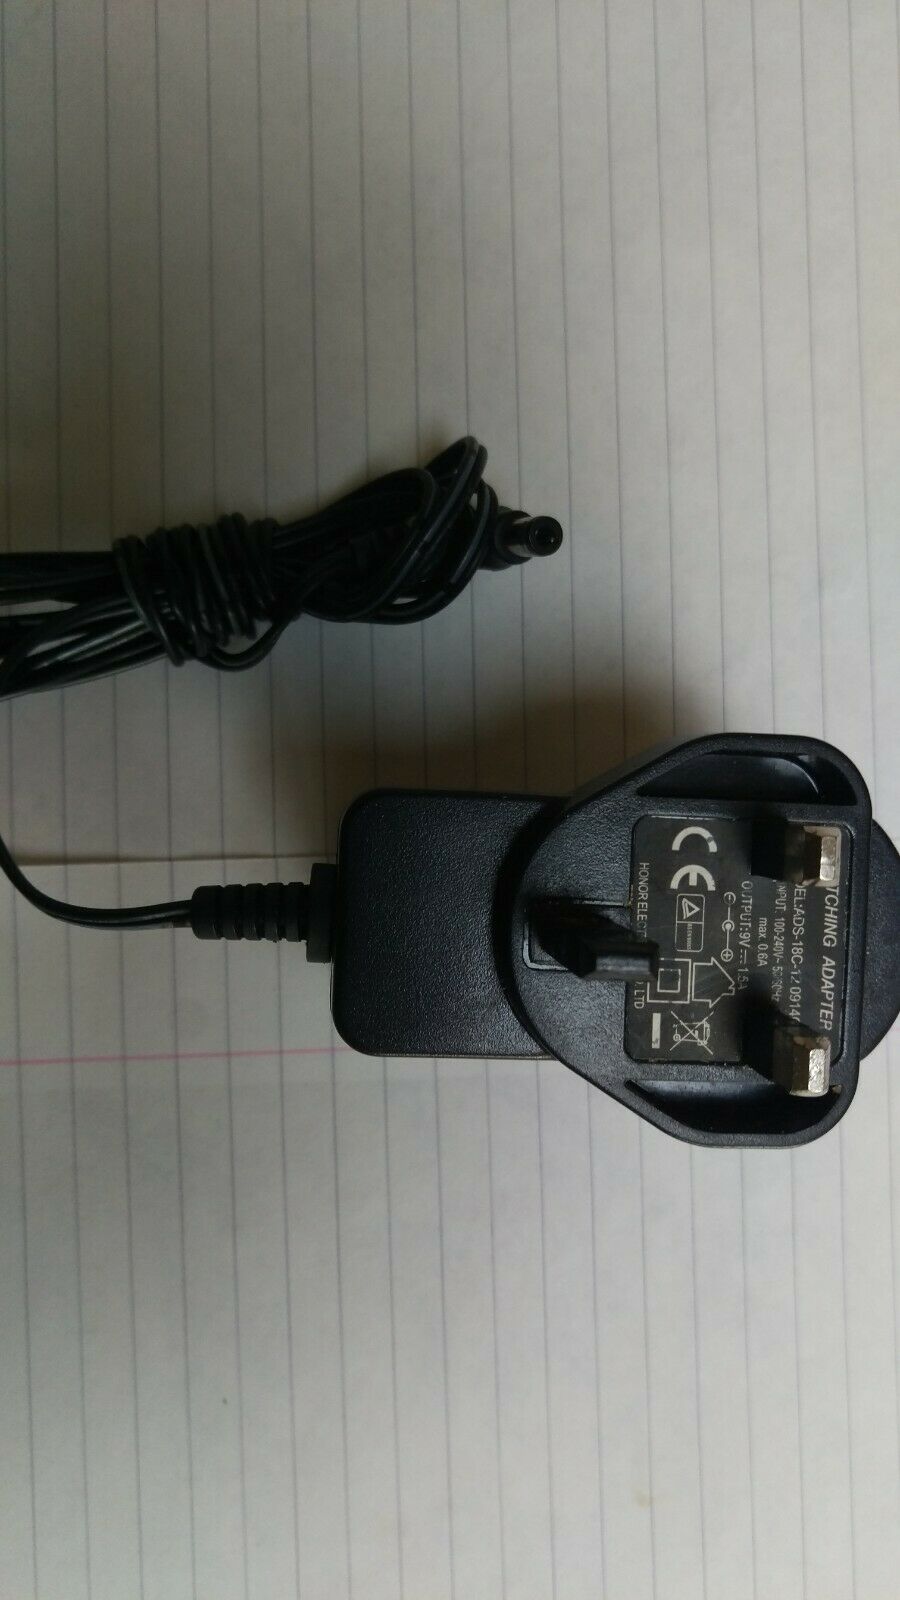 New 9V 1.5A HONOR SWITCHING ads-18c-120914 GPCU AC/DC power adapter - Click Image to Close